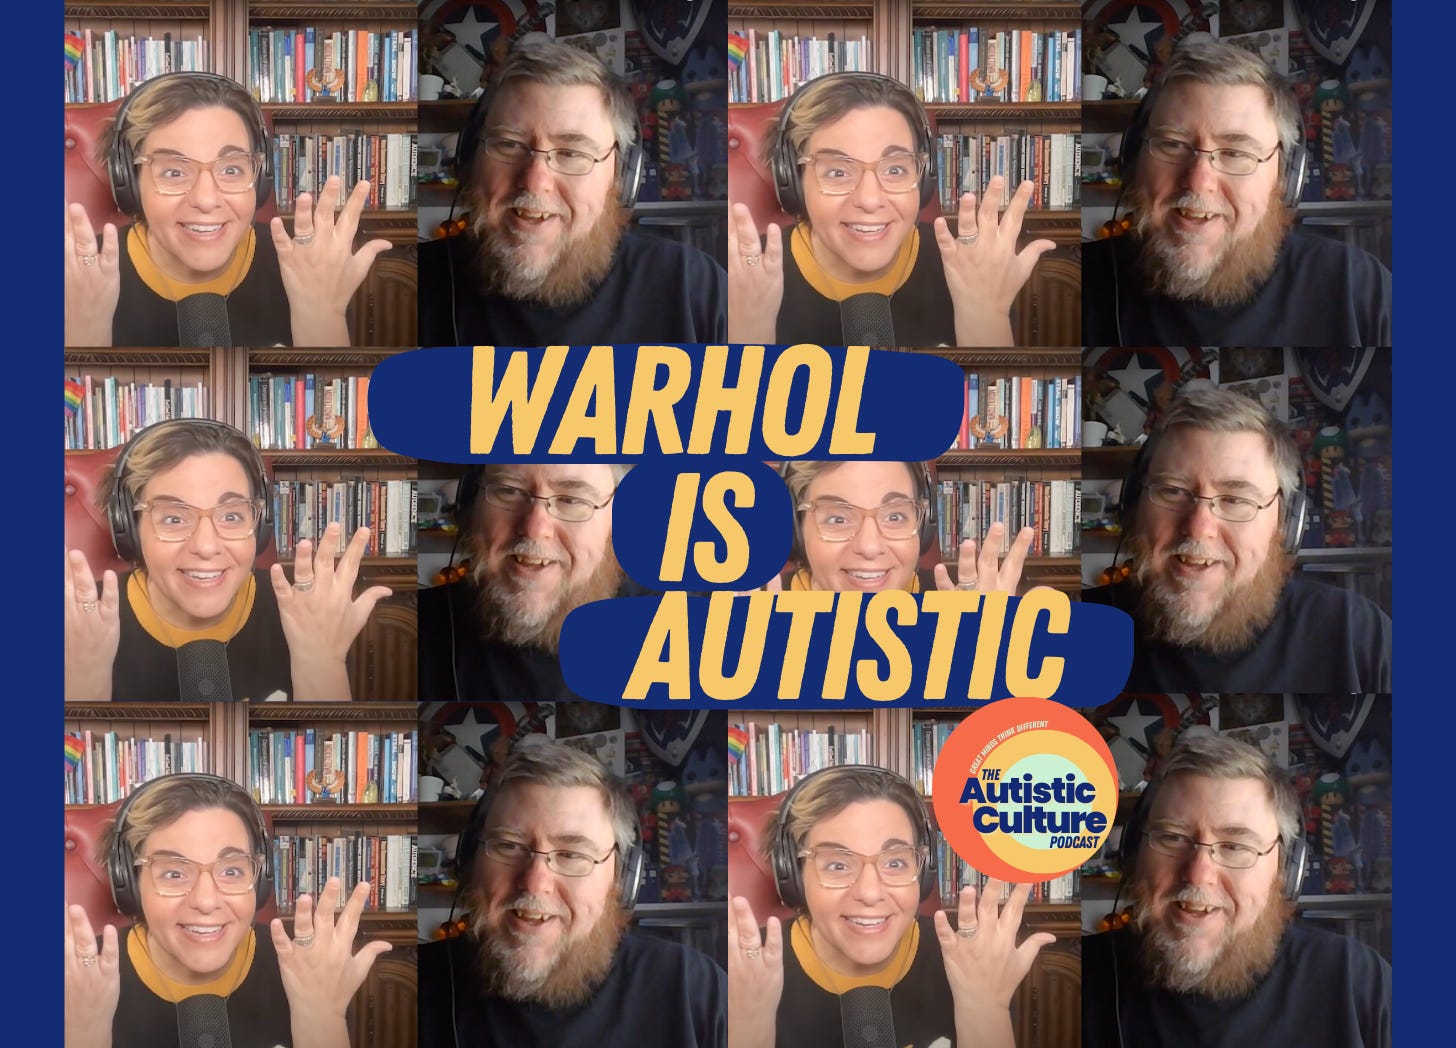 Listen to Autistic podcast hosts discuss: Was Andy Warhol Autistic? Autism Podcast | Meet this Autistic artist who loved repetition and autistic foods! Like many Autistic celebrities, he found cover under the title of "eccentric," but we know--he was one of us.